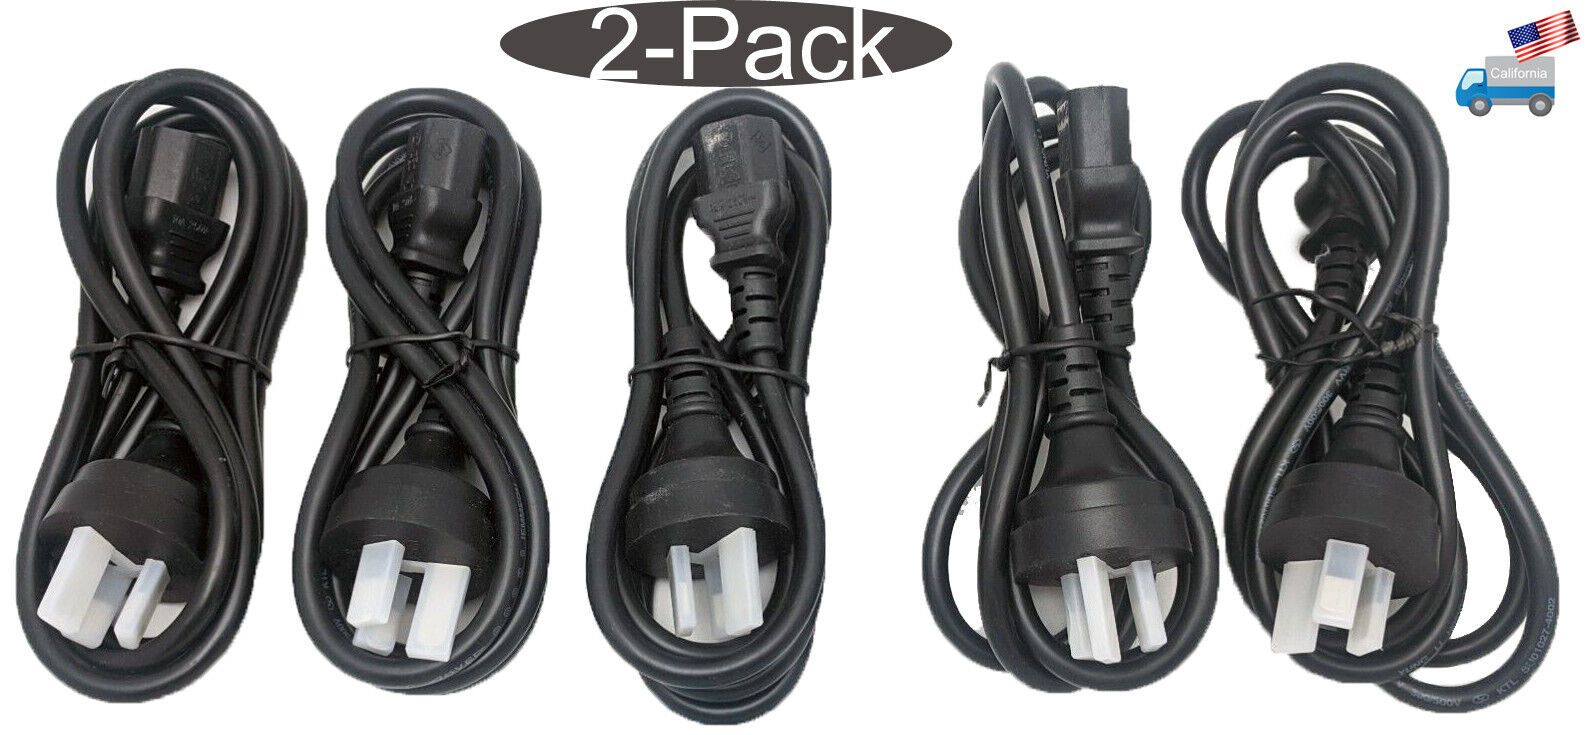 5-pack: 6\' Foreign AC Power Cord for Desktop PC,Monitor,Printer,Dell/HP Computer